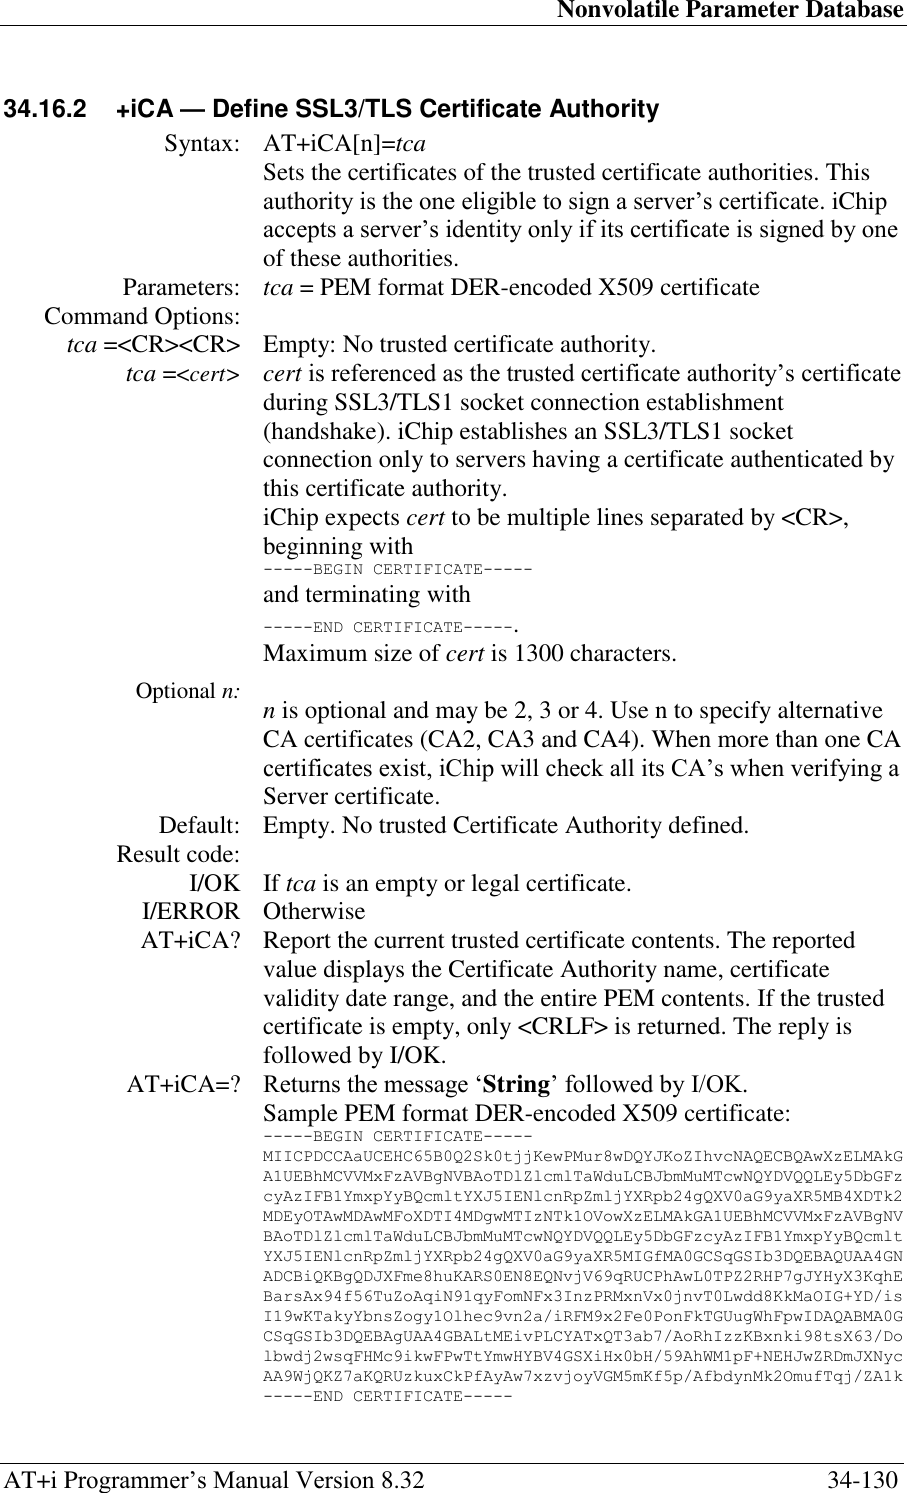 Nonvolatile Parameter Database AT+i Programmer‘s Manual Version 8.32  34-130 34.16.2  +iCA — Define SSL3/TLS Certificate Authority  Syntax: AT+iCA[n]=tca  Sets the certificates of the trusted certificate authorities. This authority is the one eligible to sign a server‘s certificate. iChip accepts a server‘s identity only if its certificate is signed by one of these authorities. Parameters: tca = PEM format DER-encoded X509 certificate Command Options:  tca =&lt;CR&gt;&lt;CR&gt; Empty: No trusted certificate authority. tca =&lt;cert&gt;            Optional n: cert is referenced as the trusted certificate authority‘s certificate during SSL3/TLS1 socket connection establishment (handshake). iChip establishes an SSL3/TLS1 socket connection only to servers having a certificate authenticated by this certificate authority. iChip expects cert to be multiple lines separated by &lt;CR&gt;, beginning with -----BEGIN CERTIFICATE----- and terminating with -----END CERTIFICATE-----. Maximum size of cert is 1300 characters.  n is optional and may be 2, 3 or 4. Use n to specify alternative CA certificates (CA2, CA3 and CA4). When more than one CA certificates exist, iChip will check all its CA‘s when verifying a Server certificate. Default: Empty. No trusted Certificate Authority defined. Result code:  I/OK If tca is an empty or legal certificate. I/ERROR Otherwise AT+iCA? Report the current trusted certificate contents. The reported value displays the Certificate Authority name, certificate validity date range, and the entire PEM contents. If the trusted certificate is empty, only &lt;CRLF&gt; is returned. The reply is followed by I/OK. AT+iCA=? Returns the message ‗String‘ followed by I/OK.  Sample PEM format DER-encoded X509 certificate: -----BEGIN CERTIFICATE----- MIICPDCCAaUCEHC65B0Q2Sk0tjjKewPMur8wDQYJKoZIhvcNAQECBQAwXzELMAkG A1UEBhMCVVMxFzAVBgNVBAoTDlZlcmlTaWduLCBJbmMuMTcwNQYDVQQLEy5DbGFz cyAzIFB1YmxpYyBQcmltYXJ5IENlcnRpZmljYXRpb24gQXV0aG9yaXR5MB4XDTk2 MDEyOTAwMDAwMFoXDTI4MDgwMTIzNTk1OVowXzELMAkGA1UEBhMCVVMxFzAVBgNV BAoTDlZlcmlTaWduLCBJbmMuMTcwNQYDVQQLEy5DbGFzcyAzIFB1YmxpYyBQcmlt YXJ5IENlcnRpZmljYXRpb24gQXV0aG9yaXR5MIGfMA0GCSqGSIb3DQEBAQUAA4GN ADCBiQKBgQDJXFme8huKARS0EN8EQNvjV69qRUCPhAwL0TPZ2RHP7gJYHyX3KqhE BarsAx94f56TuZoAqiN91qyFomNFx3InzPRMxnVx0jnvT0Lwdd8KkMaOIG+YD/is I19wKTakyYbnsZogy1Olhec9vn2a/iRFM9x2Fe0PonFkTGUugWhFpwIDAQABMA0G CSqGSIb3DQEBAgUAA4GBALtMEivPLCYATxQT3ab7/AoRhIzzKBxnki98tsX63/Do lbwdj2wsqFHMc9ikwFPwTtYmwHYBV4GSXiHx0bH/59AhWM1pF+NEHJwZRDmJXNyc AA9WjQKZ7aKQRUzkuxCkPfAyAw7xzvjoyVGM5mKf5p/AfbdynMk2OmufTqj/ZA1k -----END CERTIFICATE-----  